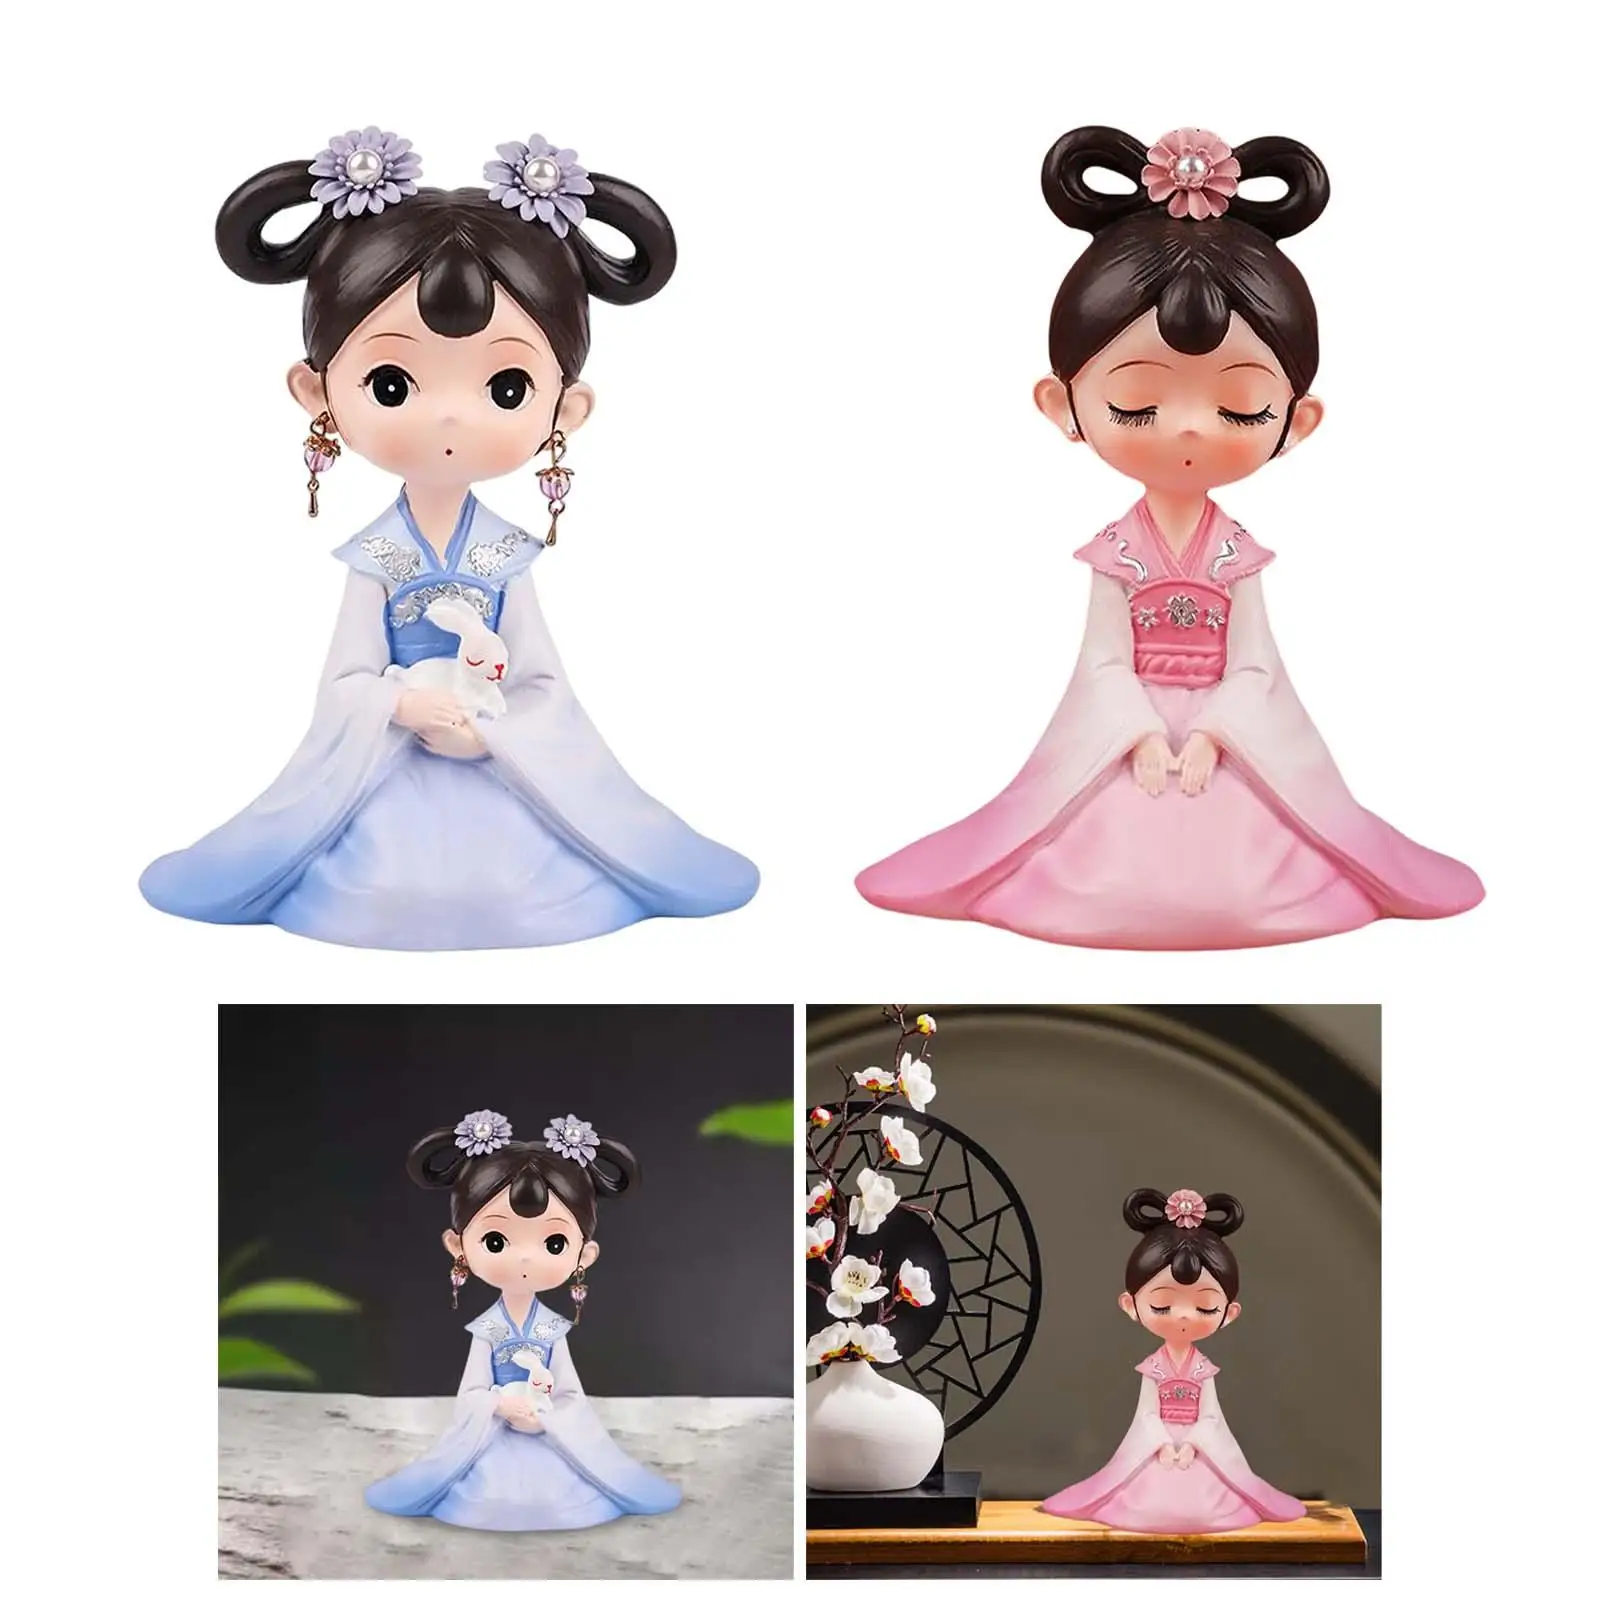 Chinese Ancient Girl Doll Hanfu Girl Statue Resin Collectible Figurine Decoration Ornaments for Home, Bedroom, Bar Ornament